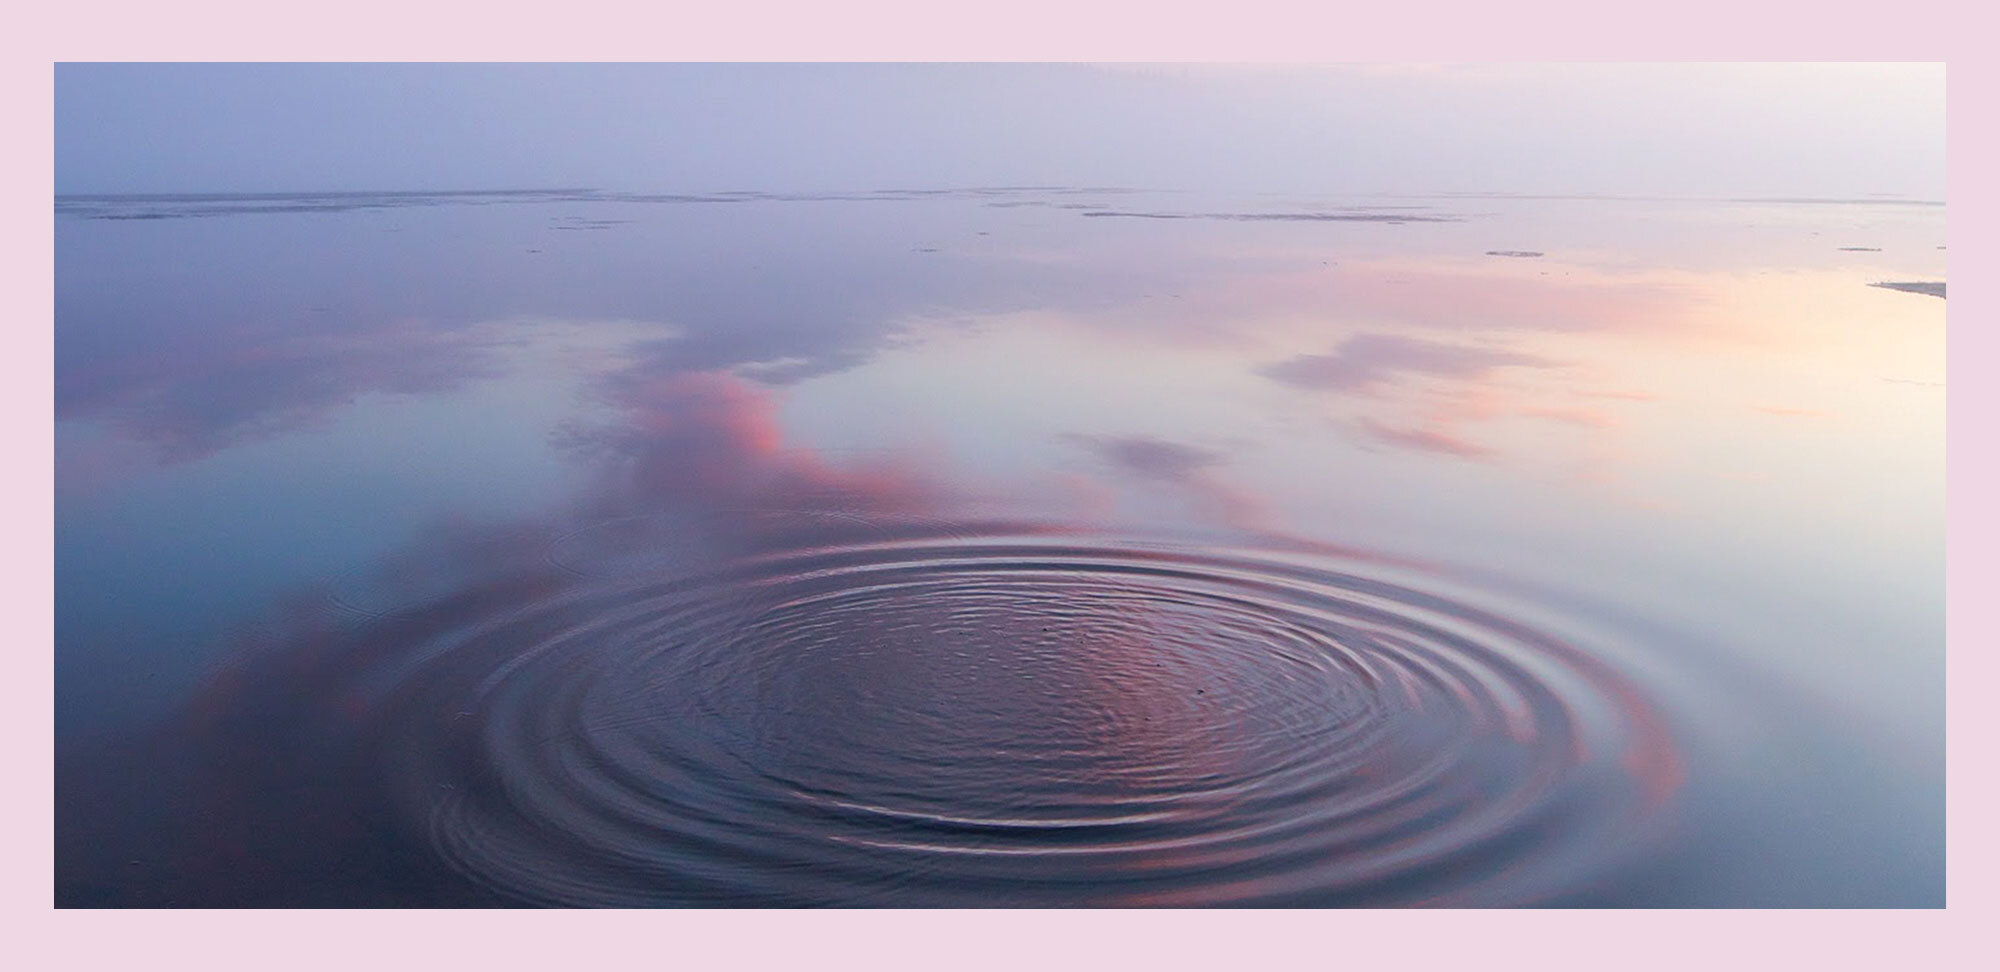 Image of ripples made in a large body of water